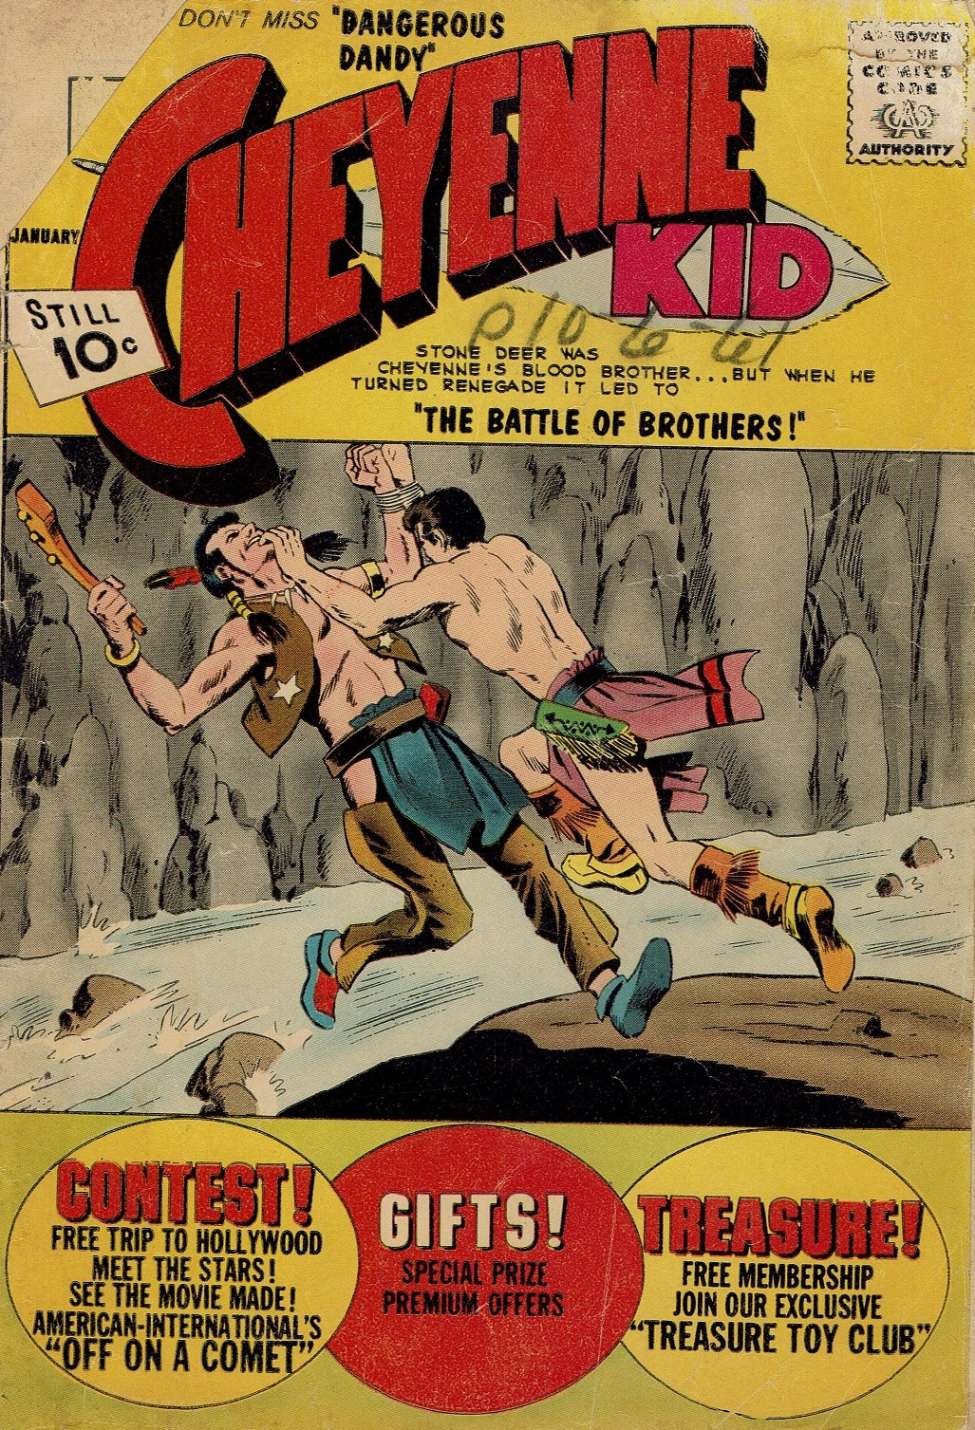 Book Cover For Cheyenne Kid 32